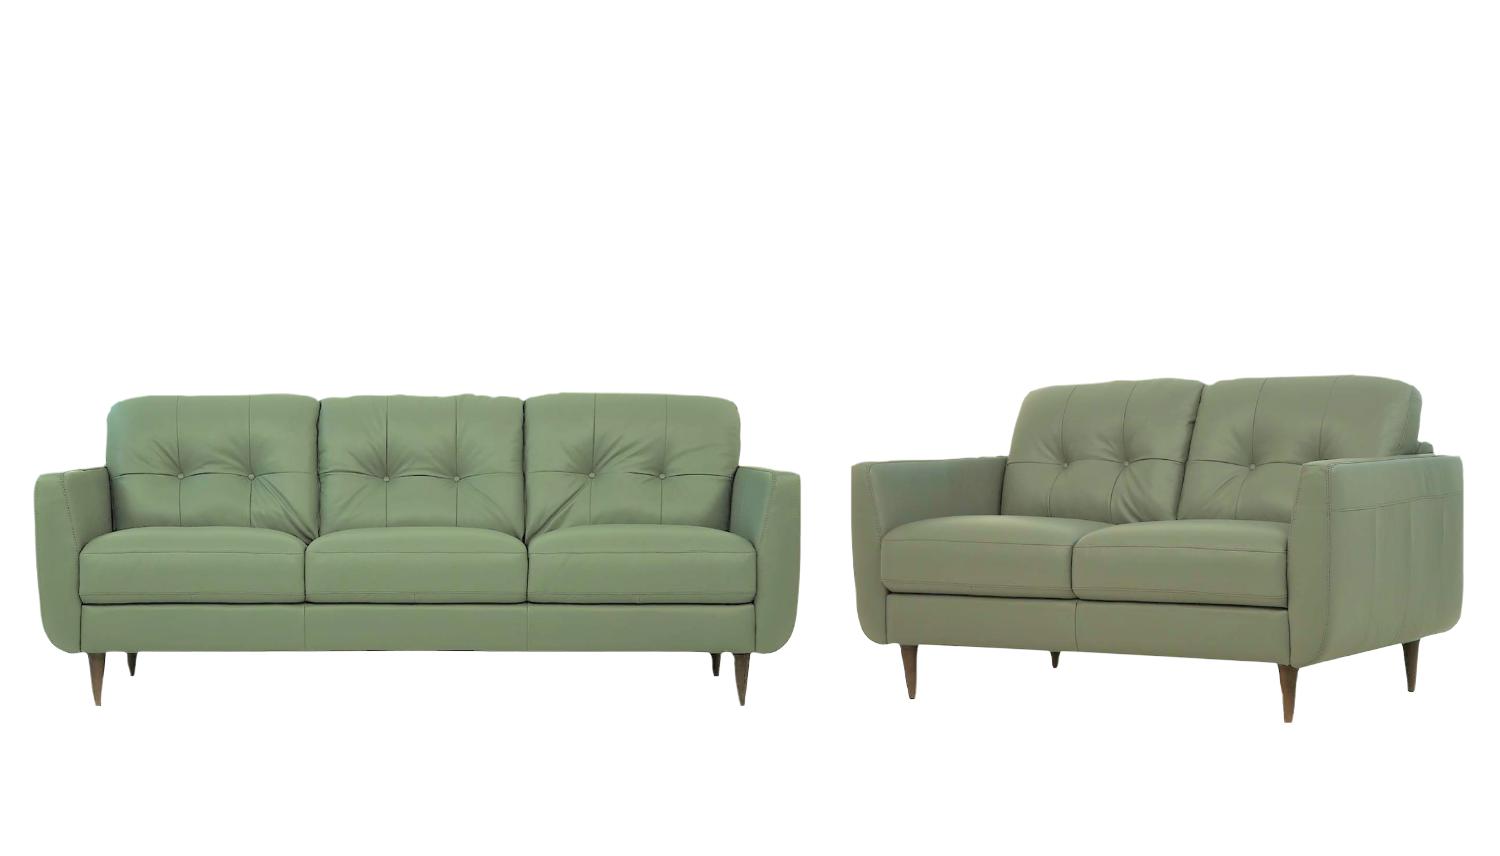 Transitional Sofa and Loveseat Set Radwan 54960-2pcs in Spring green Leather